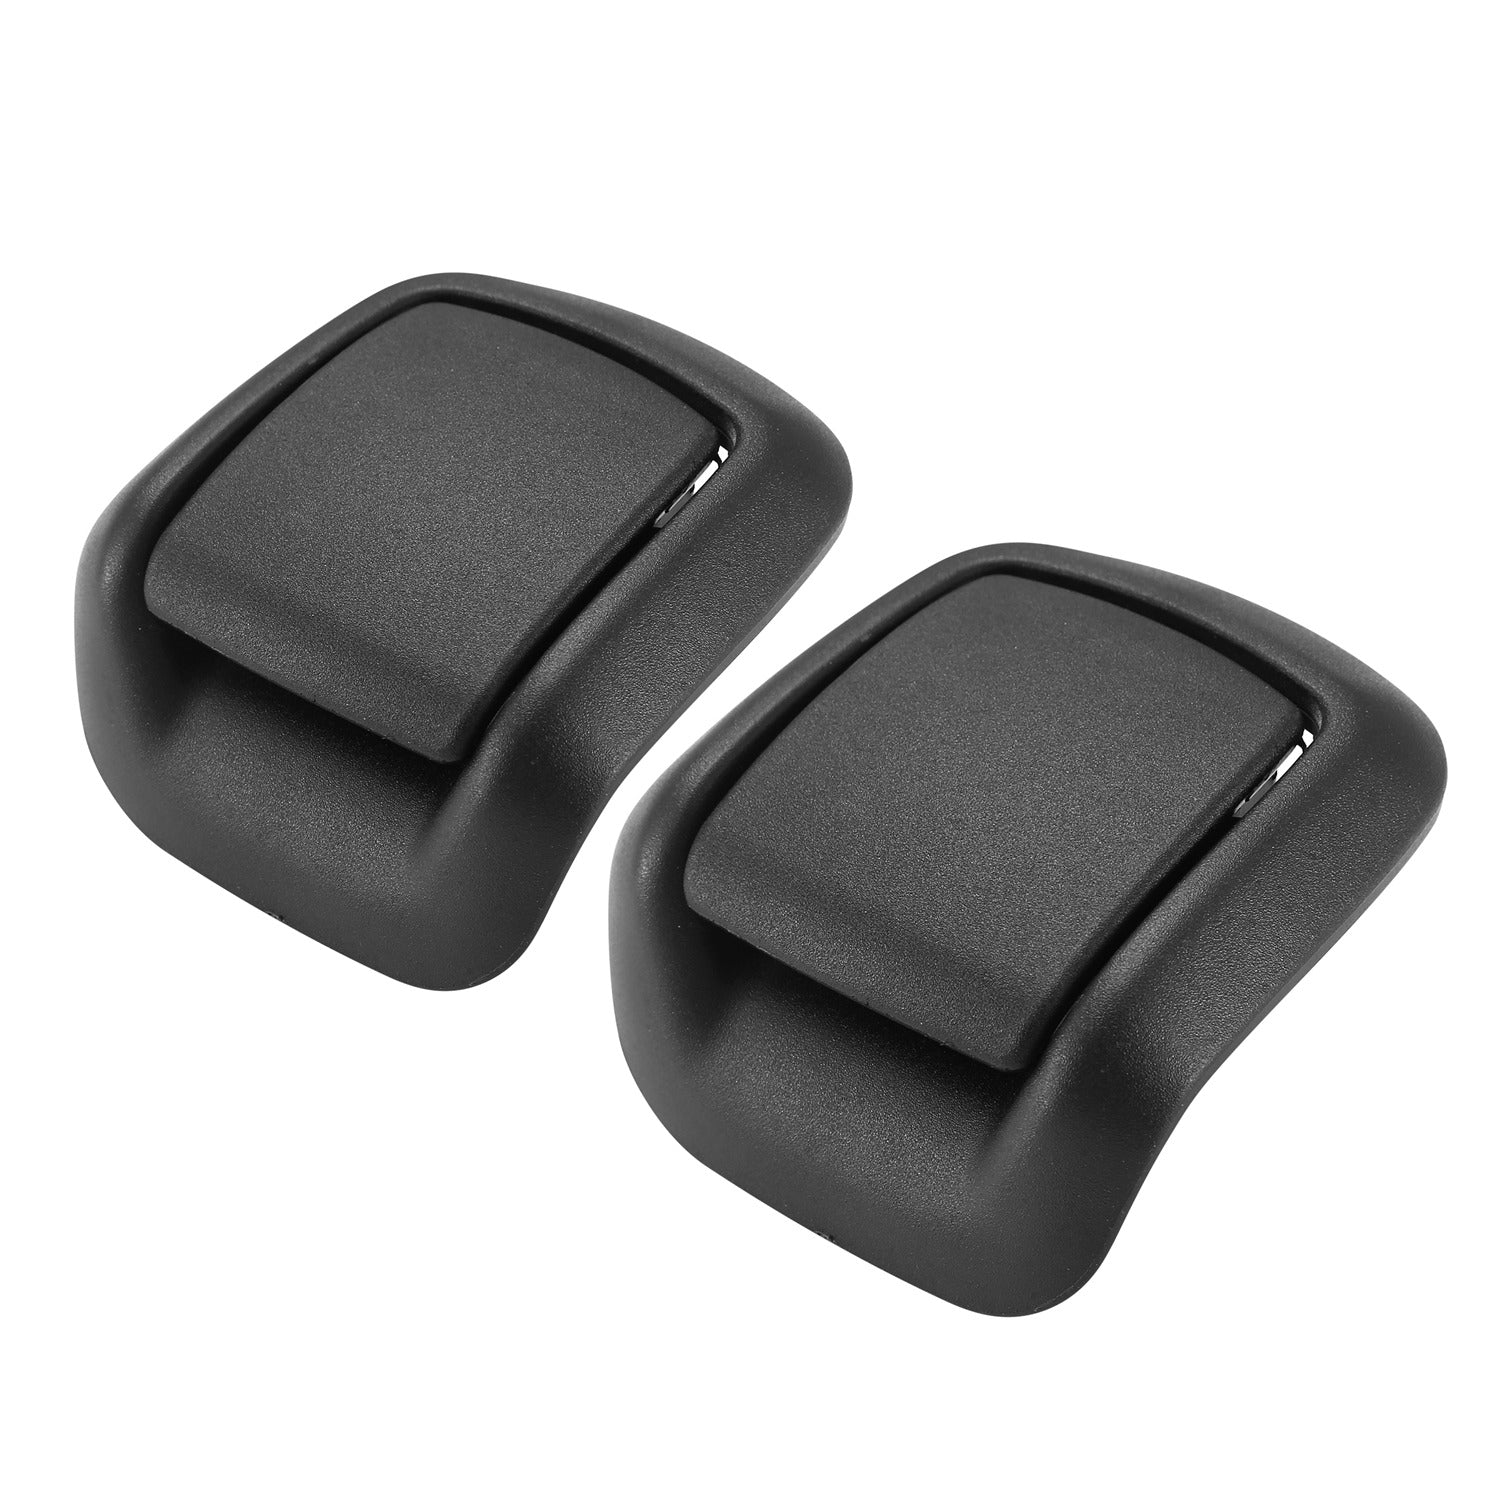 title:1 Pair Car Seat Release Handles for Ford Fiesta MK6 2002-2008 Auto Seat Recliner Handles Front Left & Right Fitting;color:Black